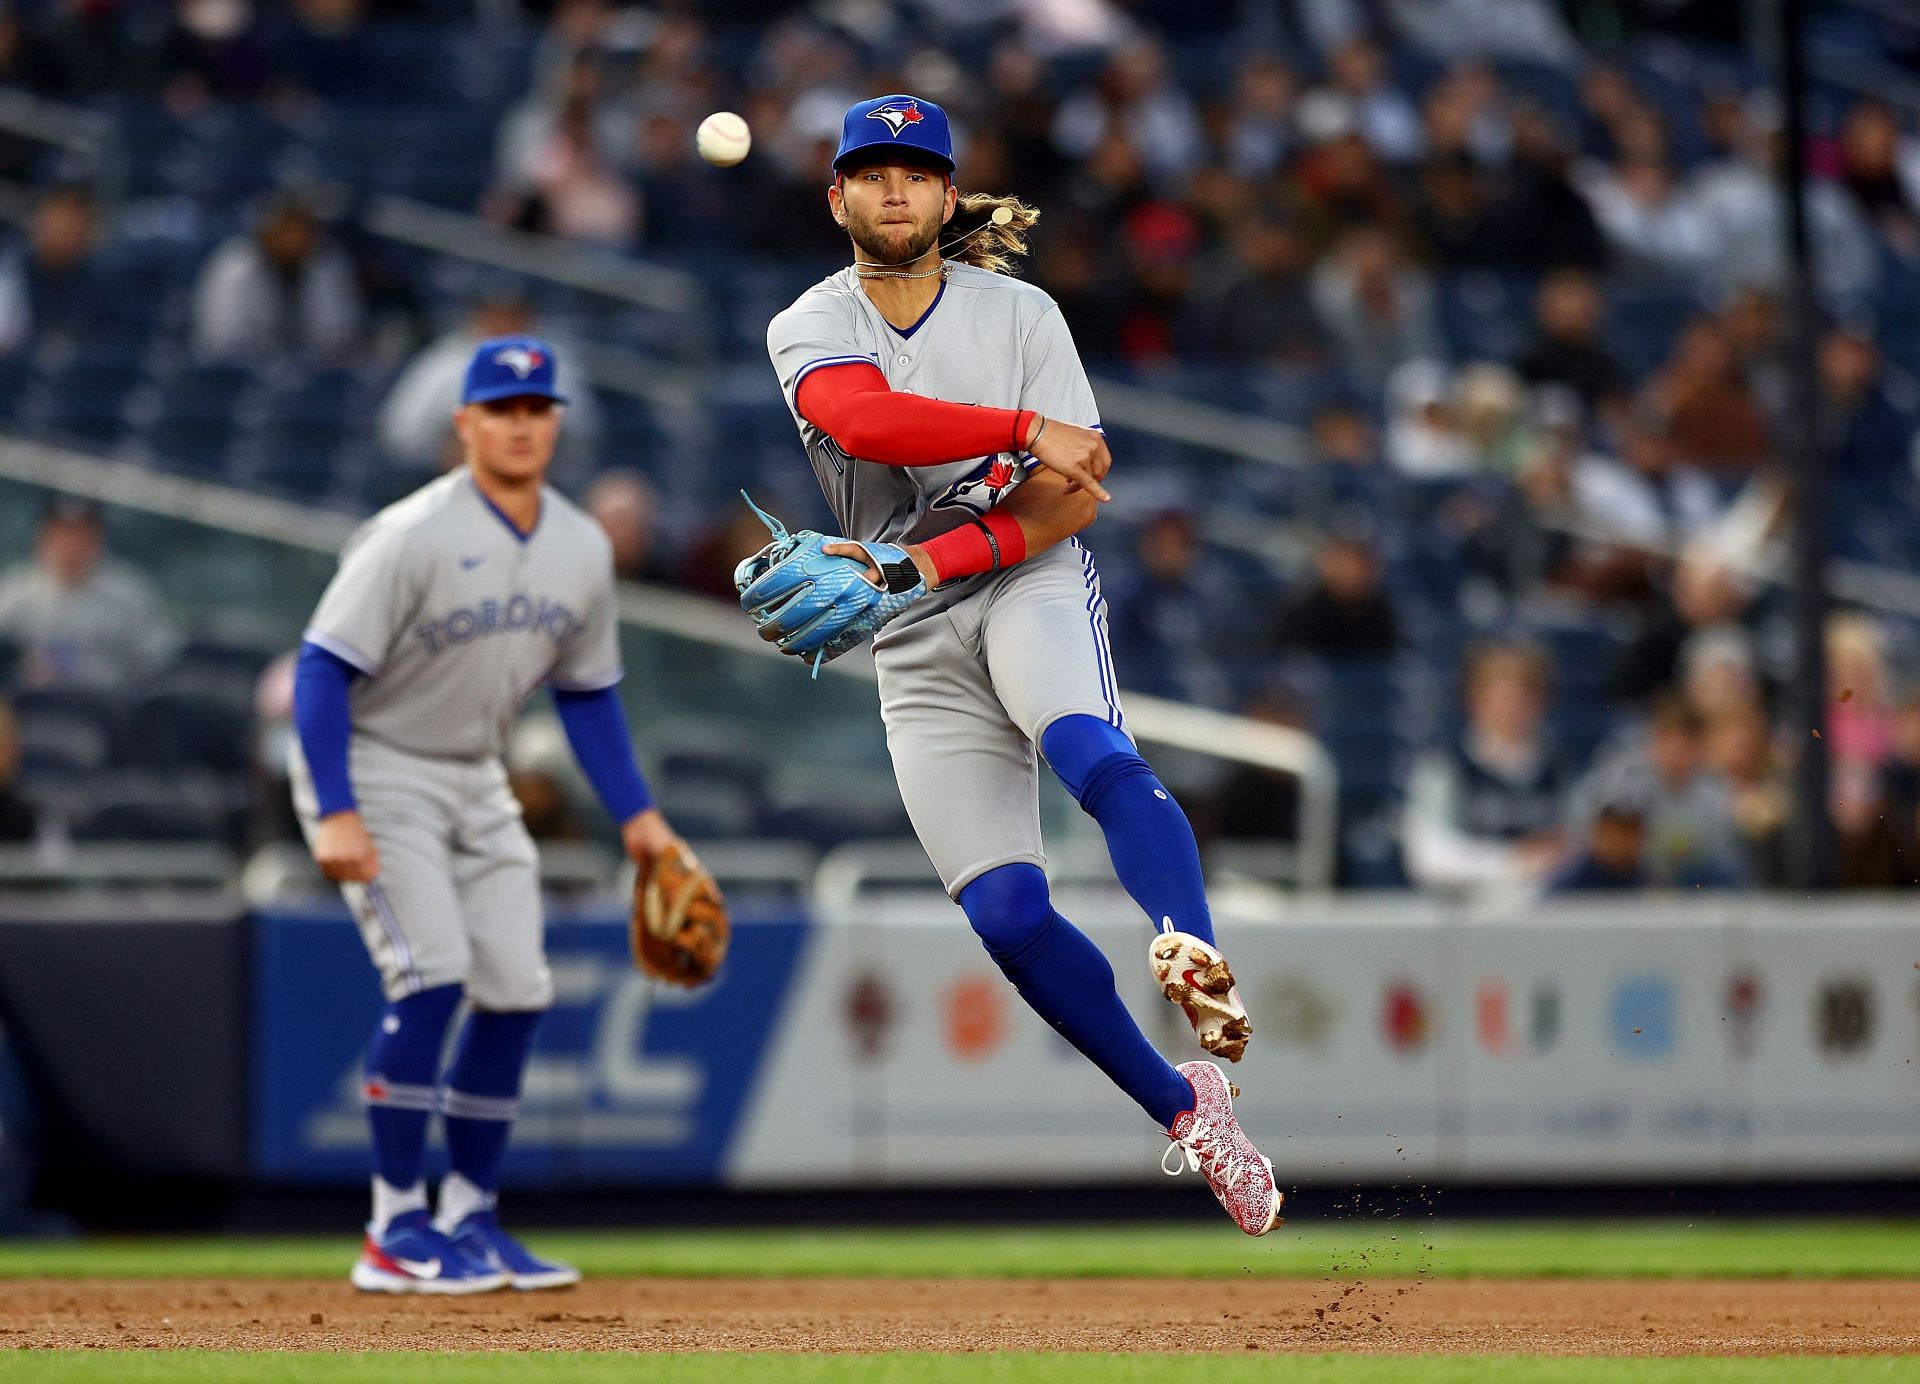 Bo bichette looked like Michael Jordan making that catch” - Toronto Blue  Jays shortstop Bo Bichette stuns viewers with a full-extension double-play  grab